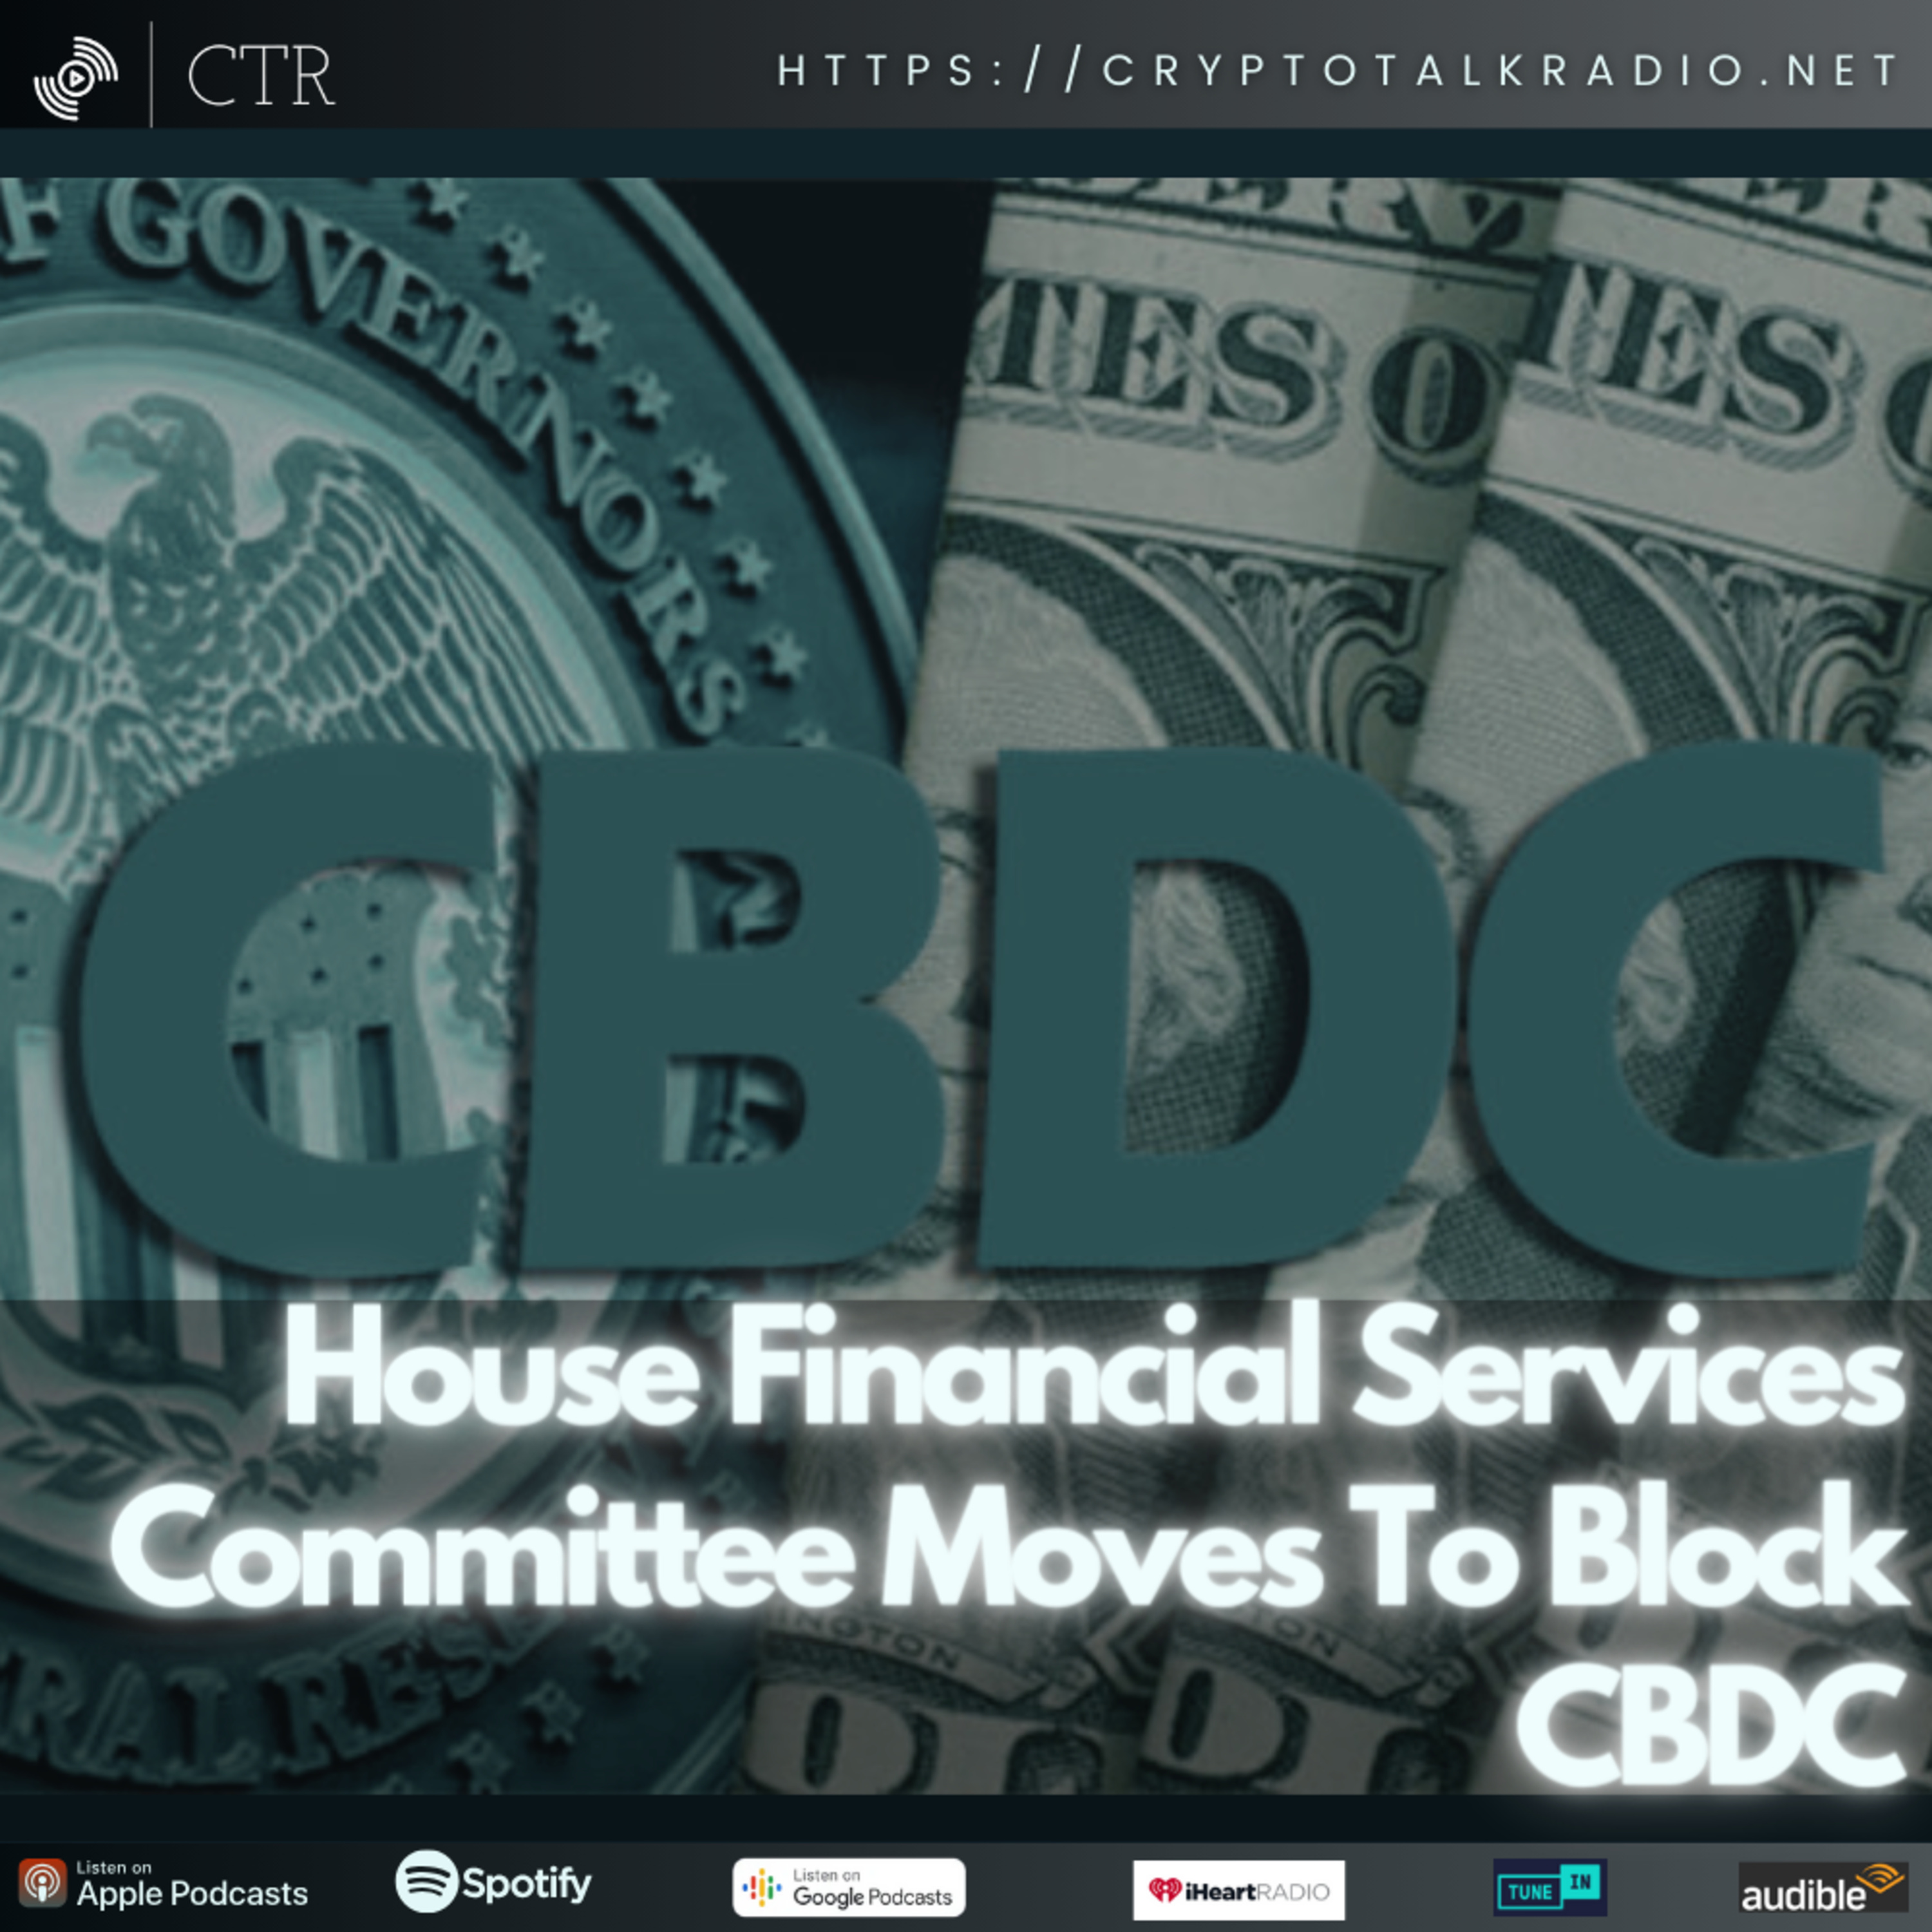 House Financial Services Committee Moves To Block #CBDC